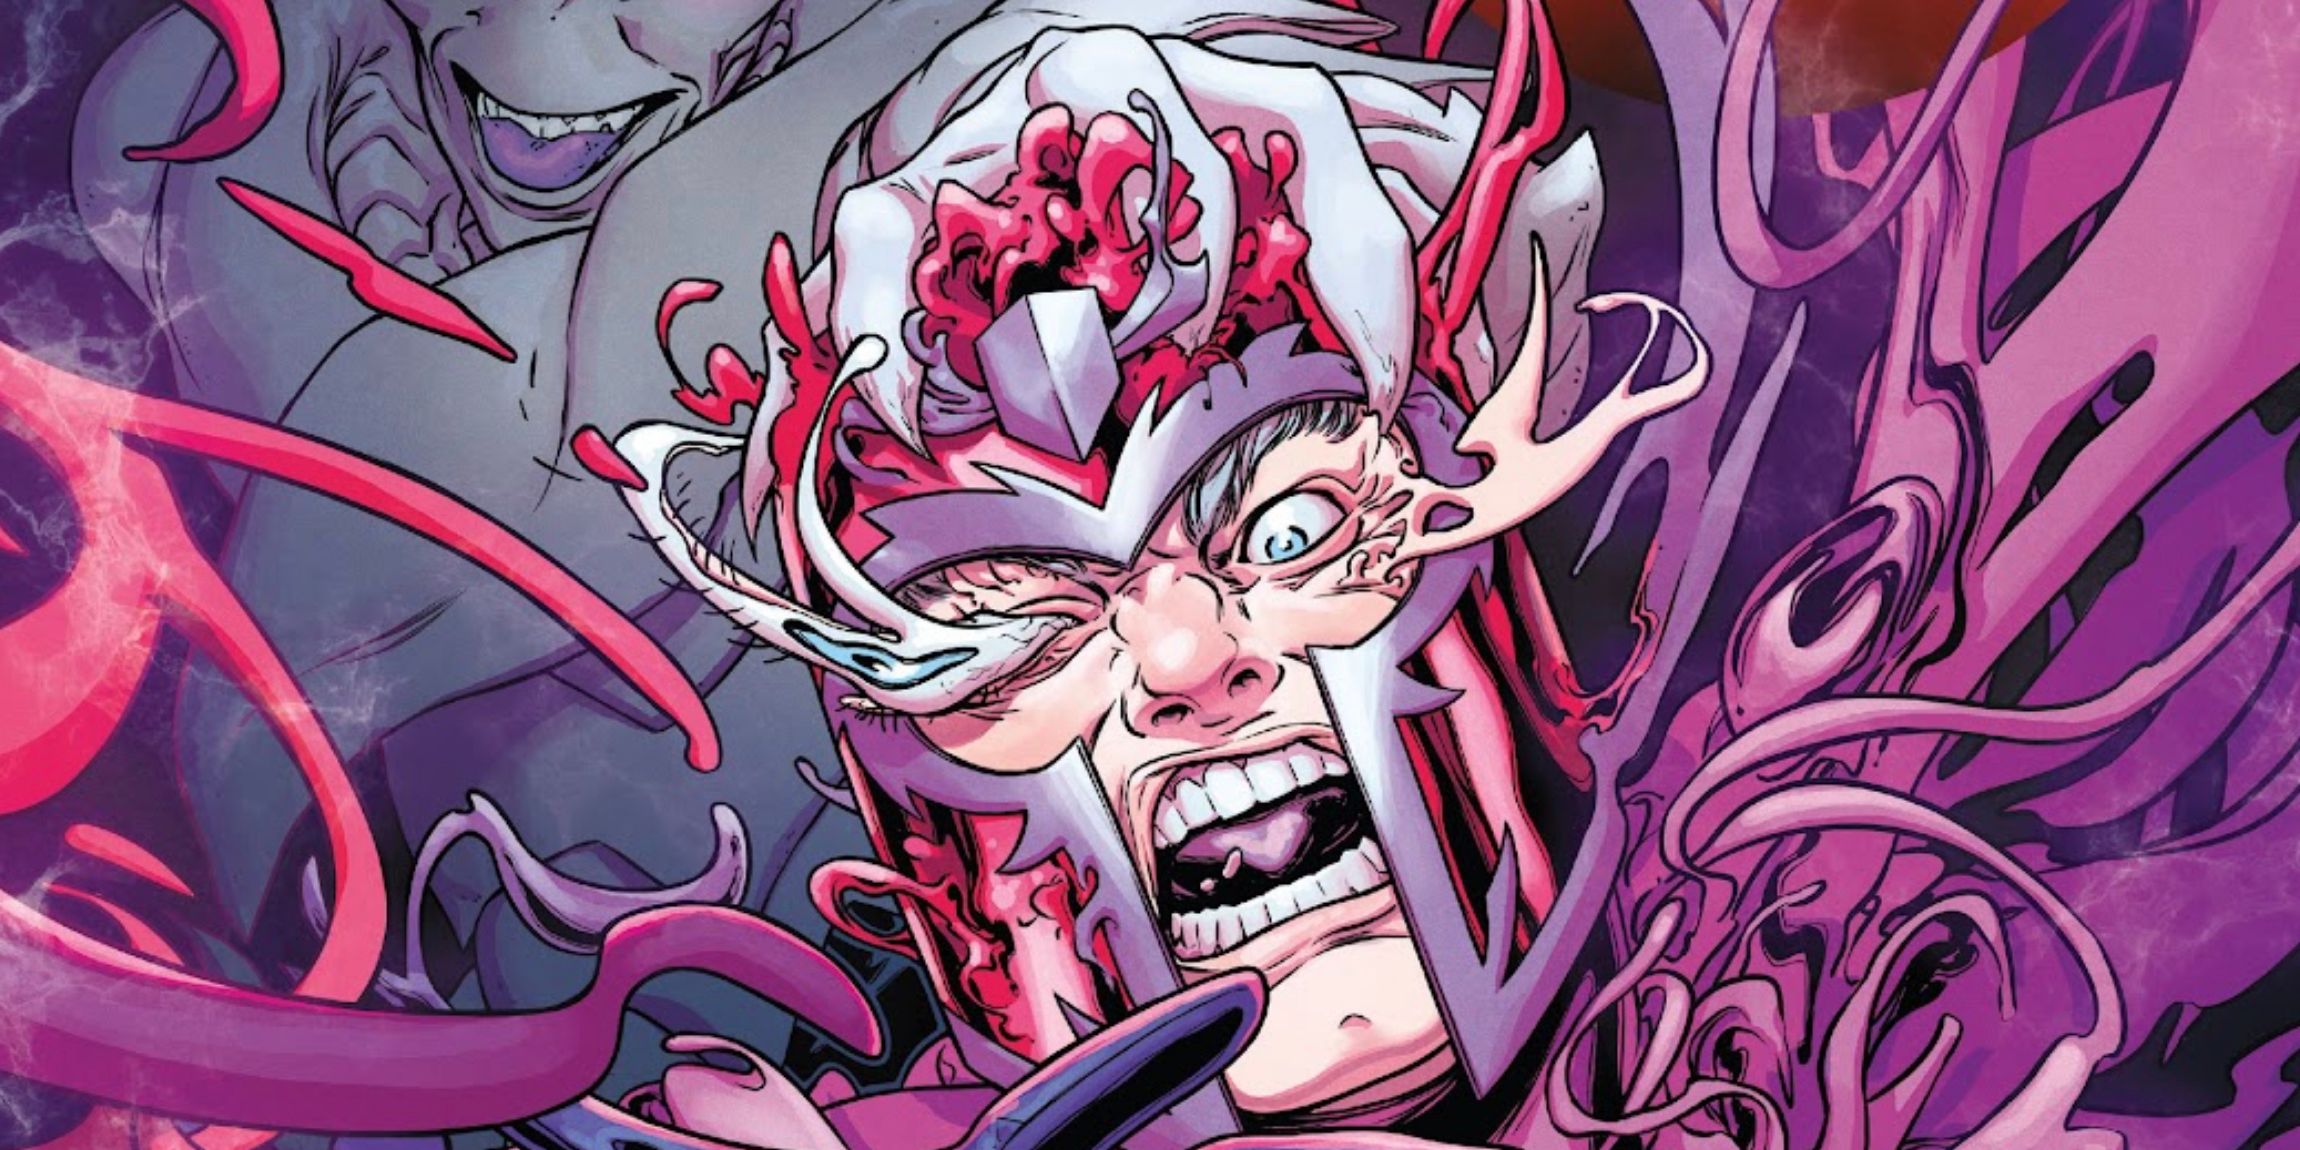 A pained Magneto, his flesh almost disassembled by the powers of the mutant Tarn, who stands behind him.